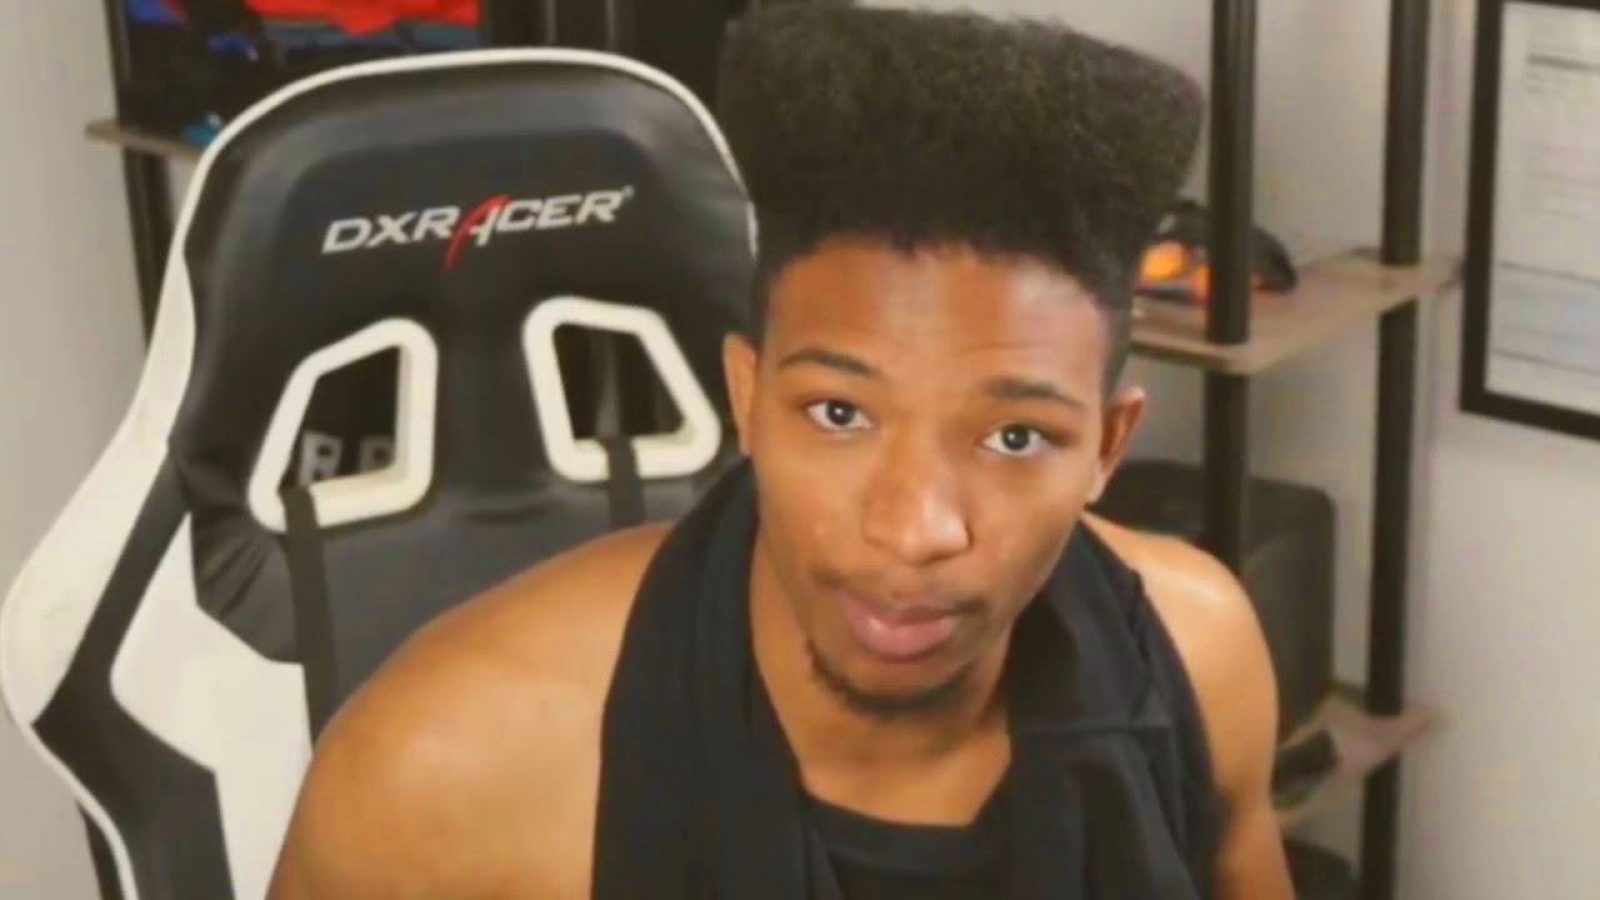 Youtubers That Made Porn - YouTuber Etika detained by NYPD during Instagram Live broadcast - Dexerto